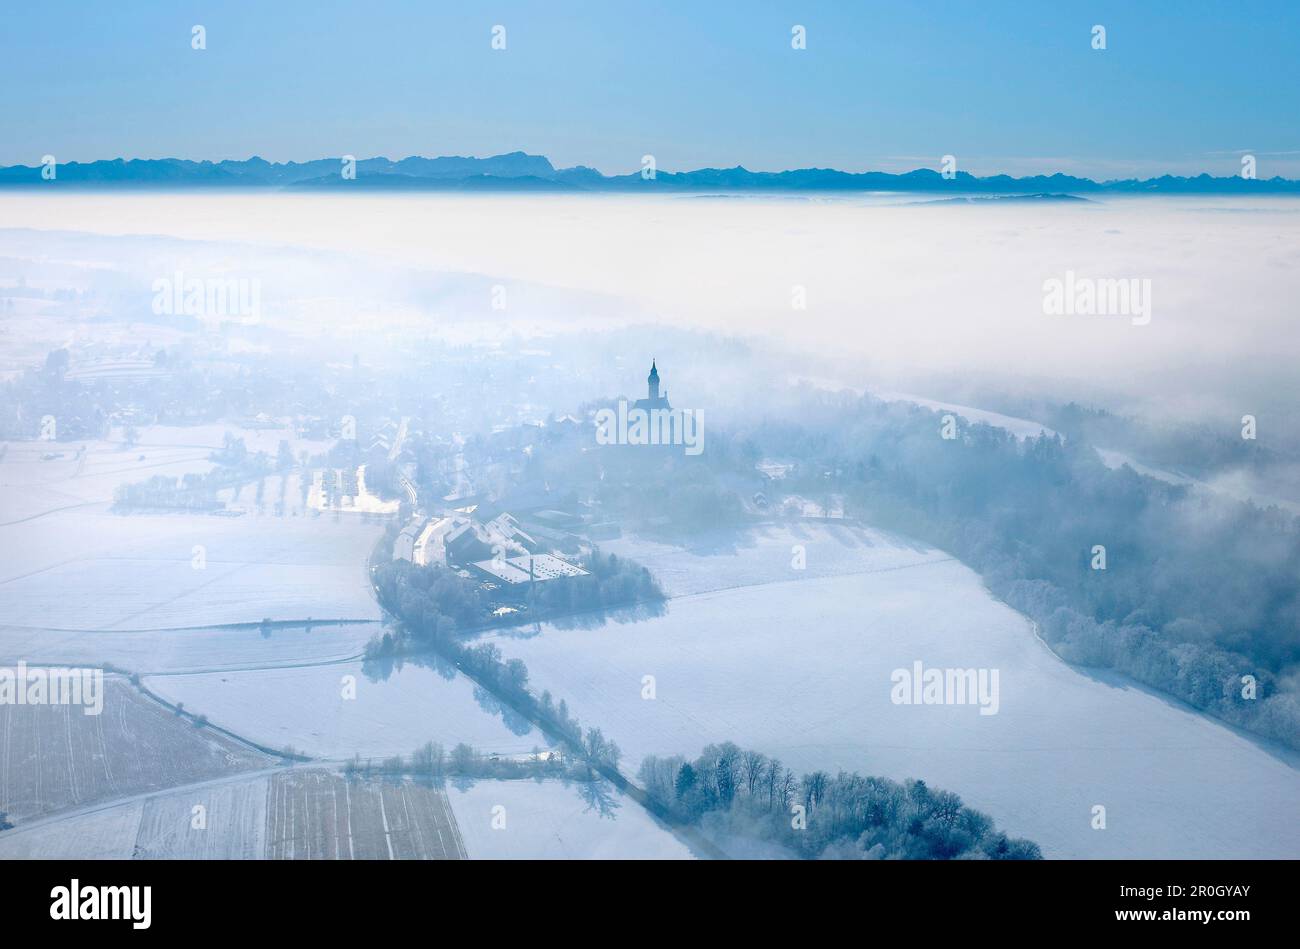 Aerial shot of Andechs Abbey with Wetterstein mountain range, Ester mountains and Karwendel mountains in background, Upper Bavaria, Germany Stock Photo